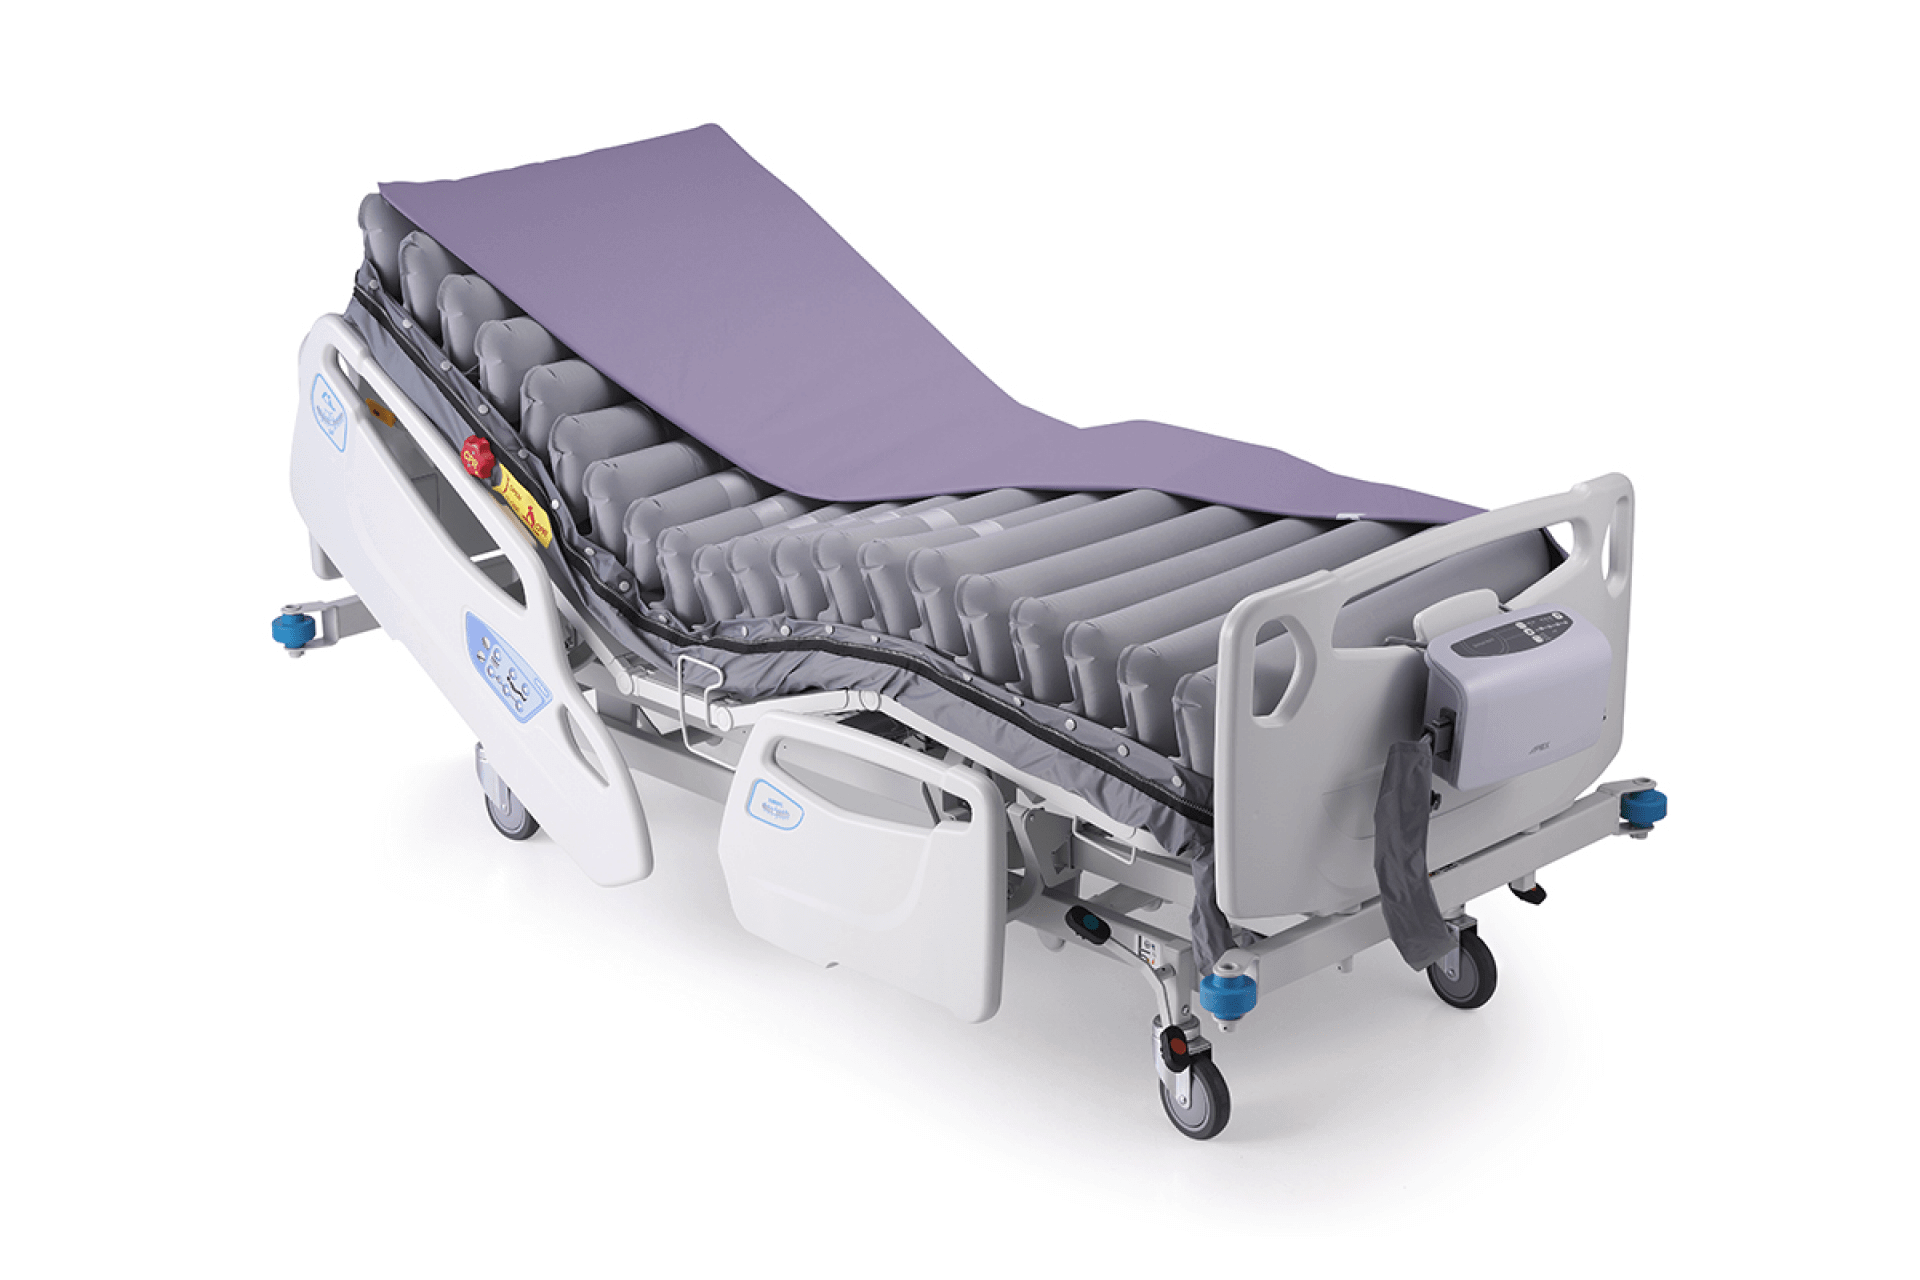 Domus Auto - Medical Bed - ES Wellell